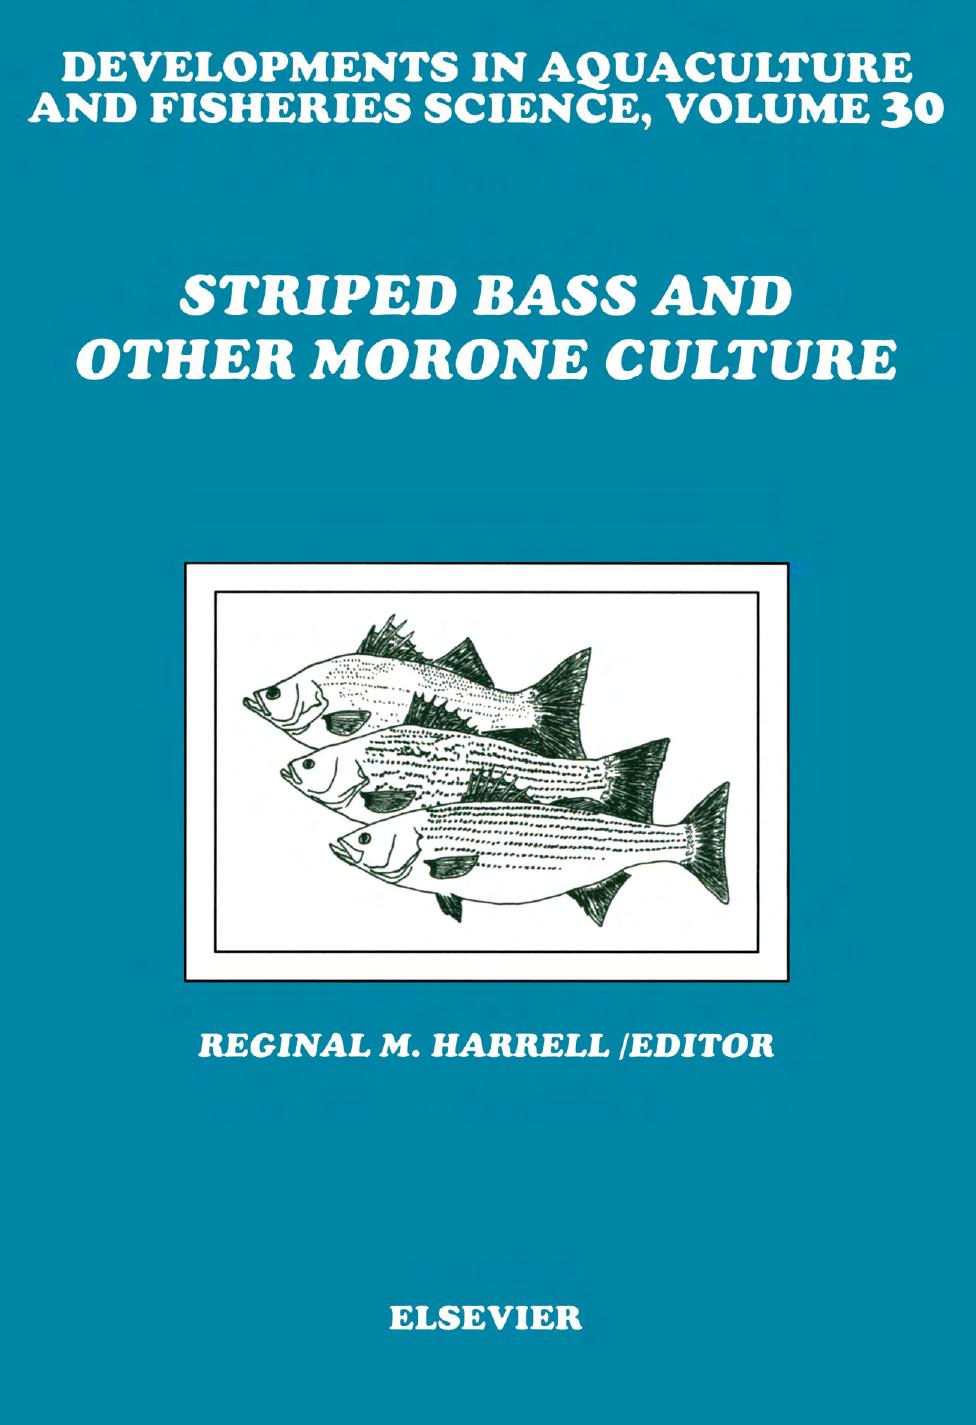 Striped Bass and Other Morone Culture-Elsevier Science (1997)